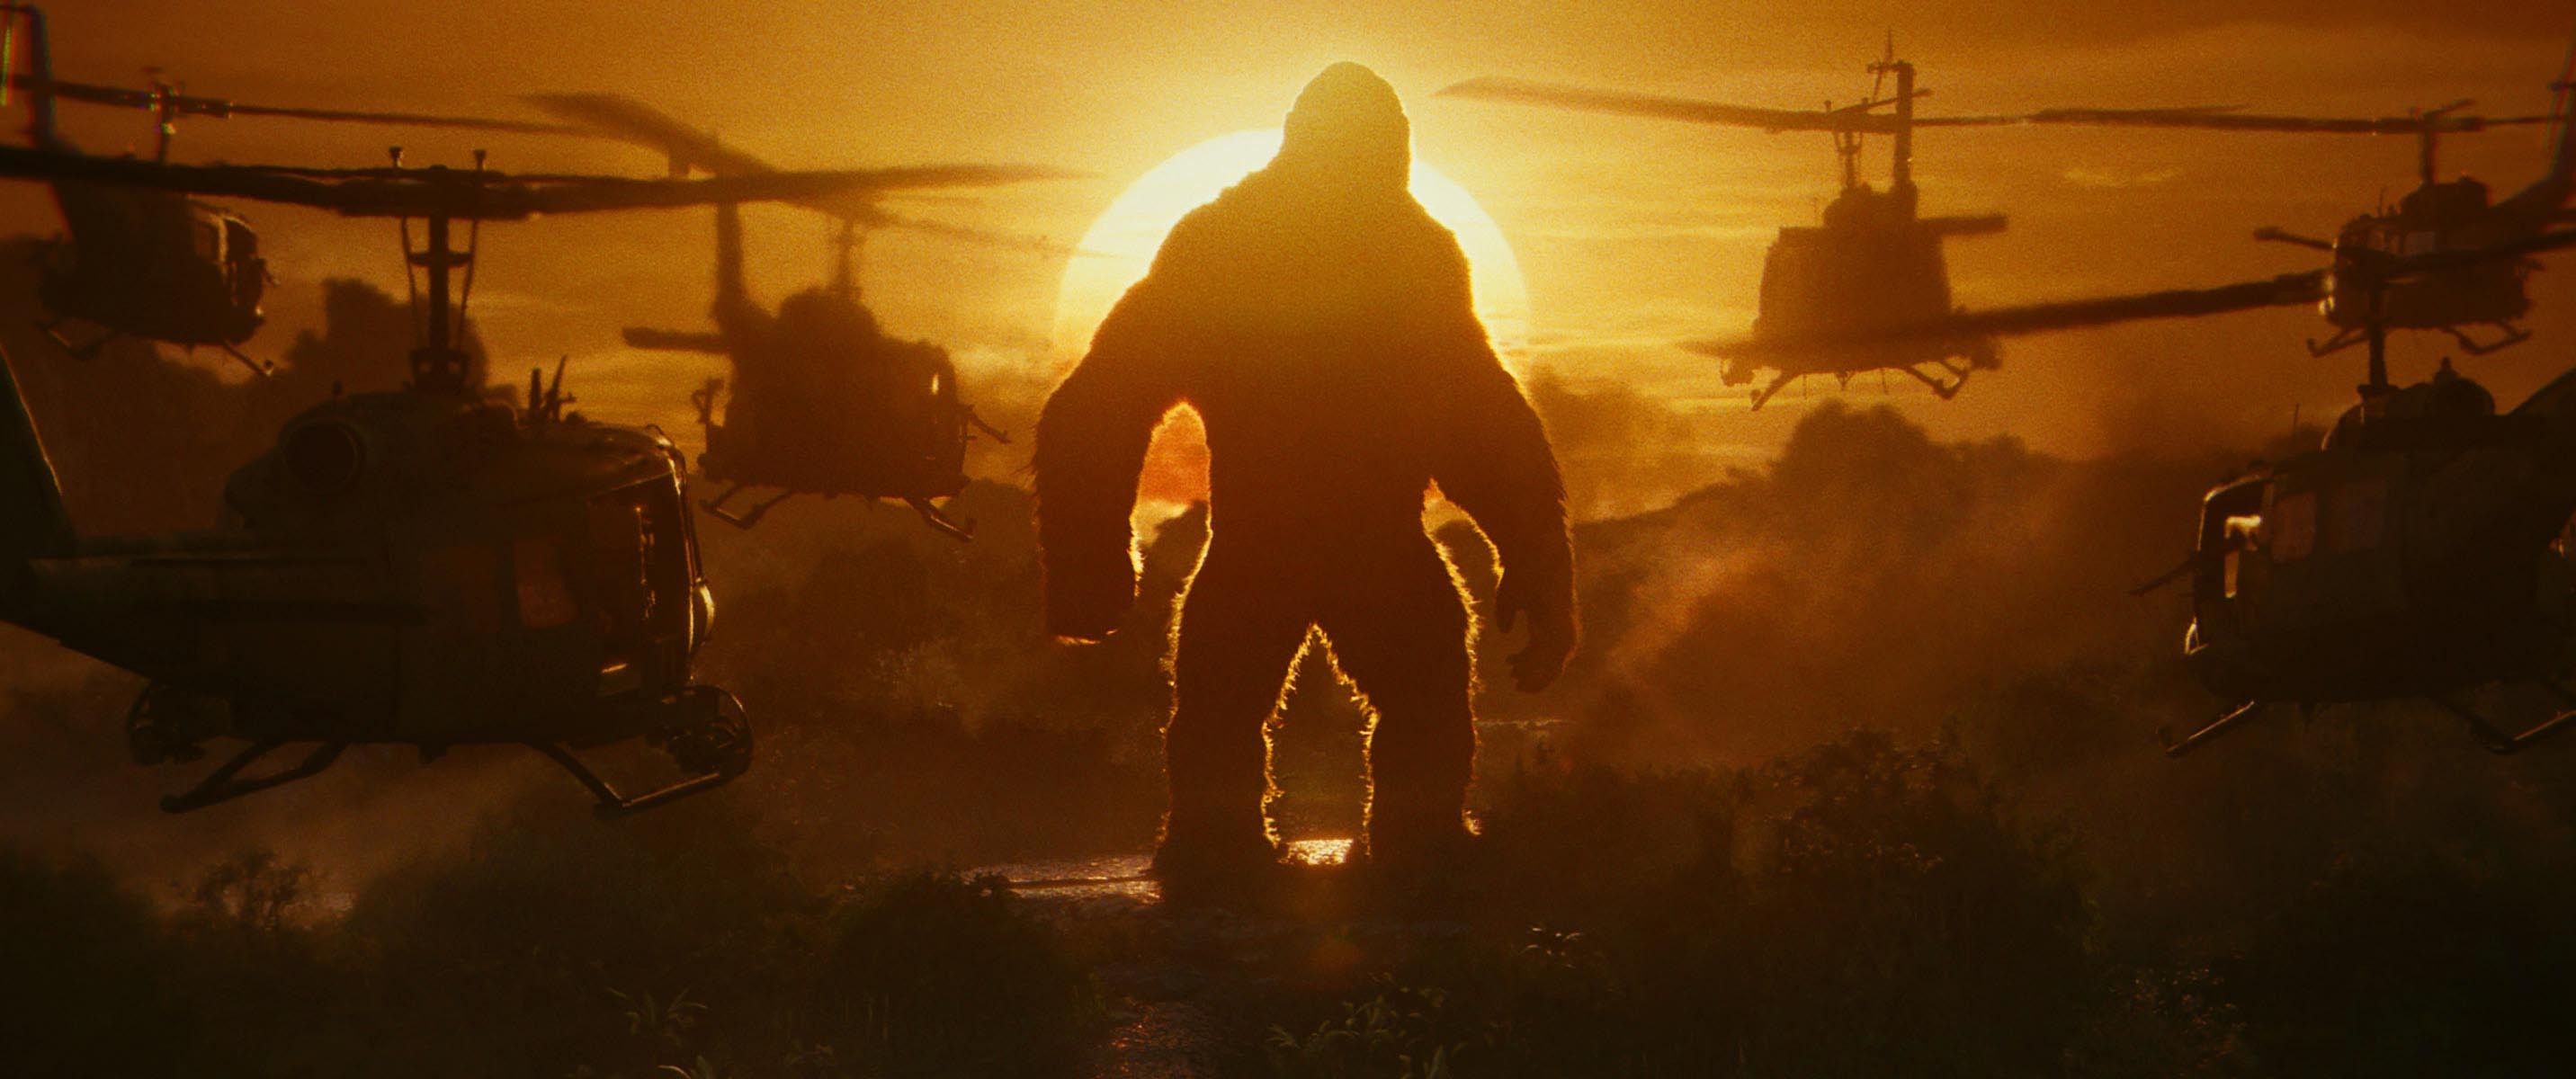 Kong Skull Island 4K Helicopter Wallpapers